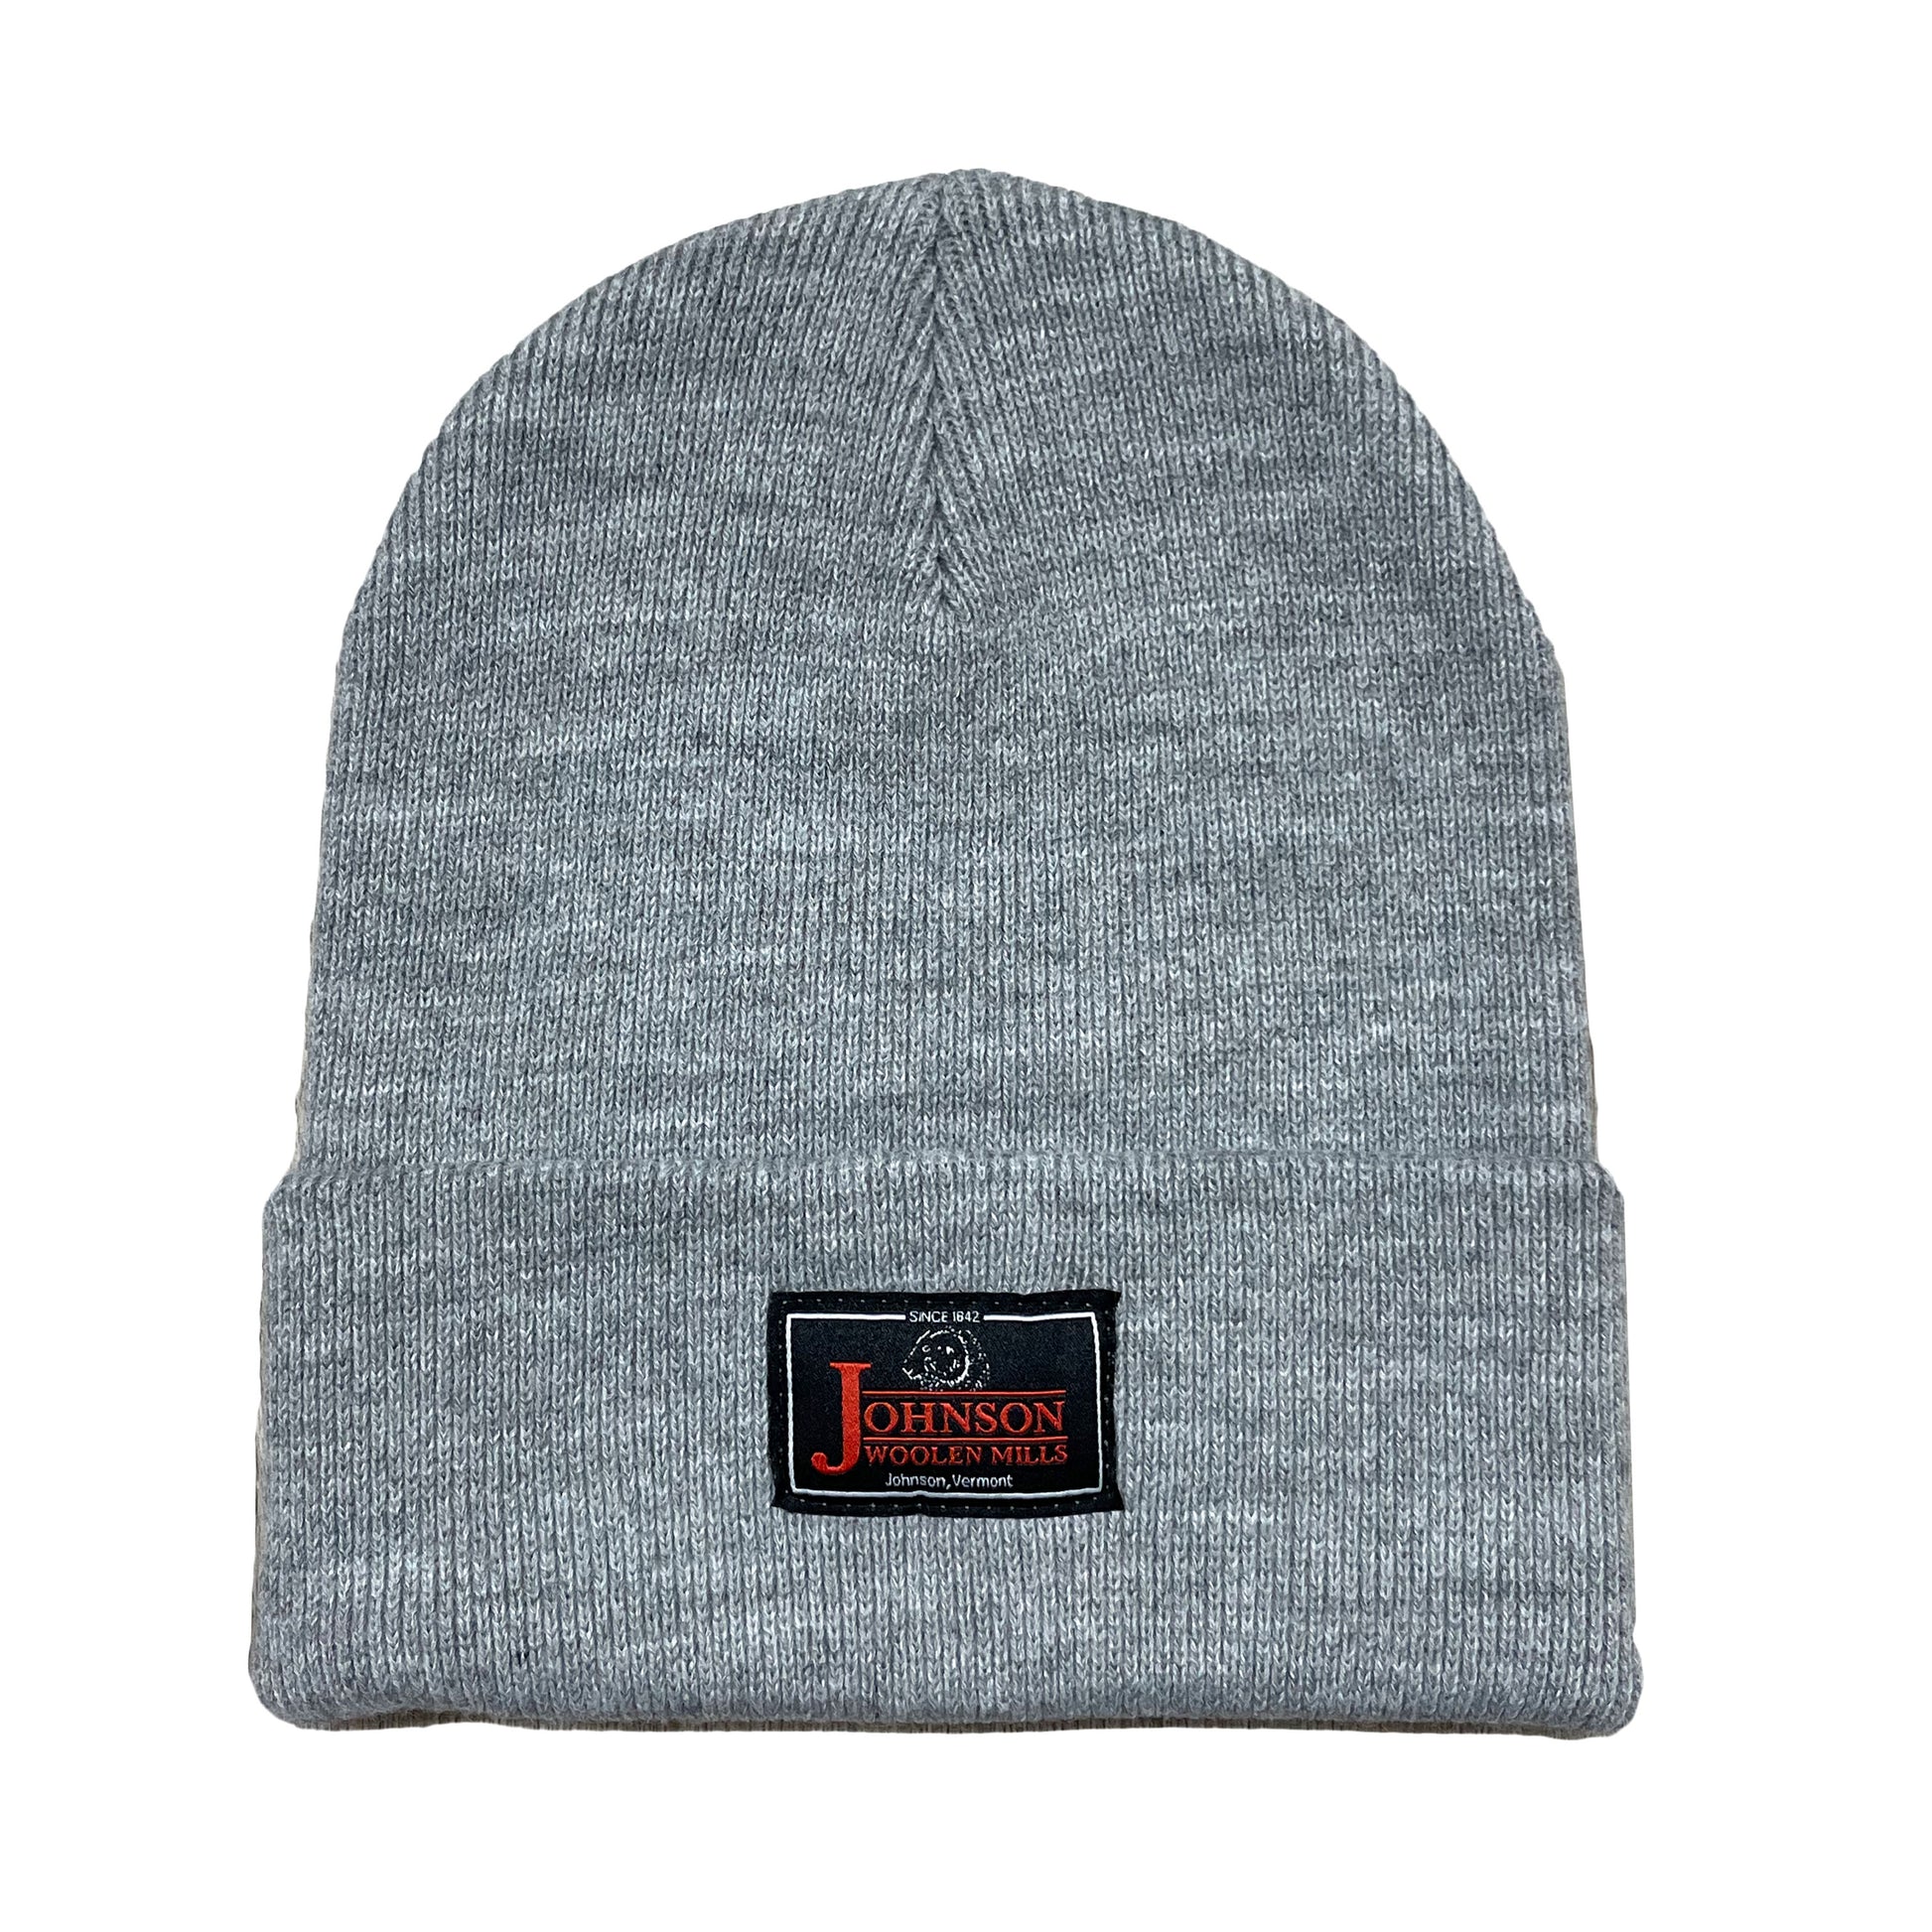 Gray beanie with black label